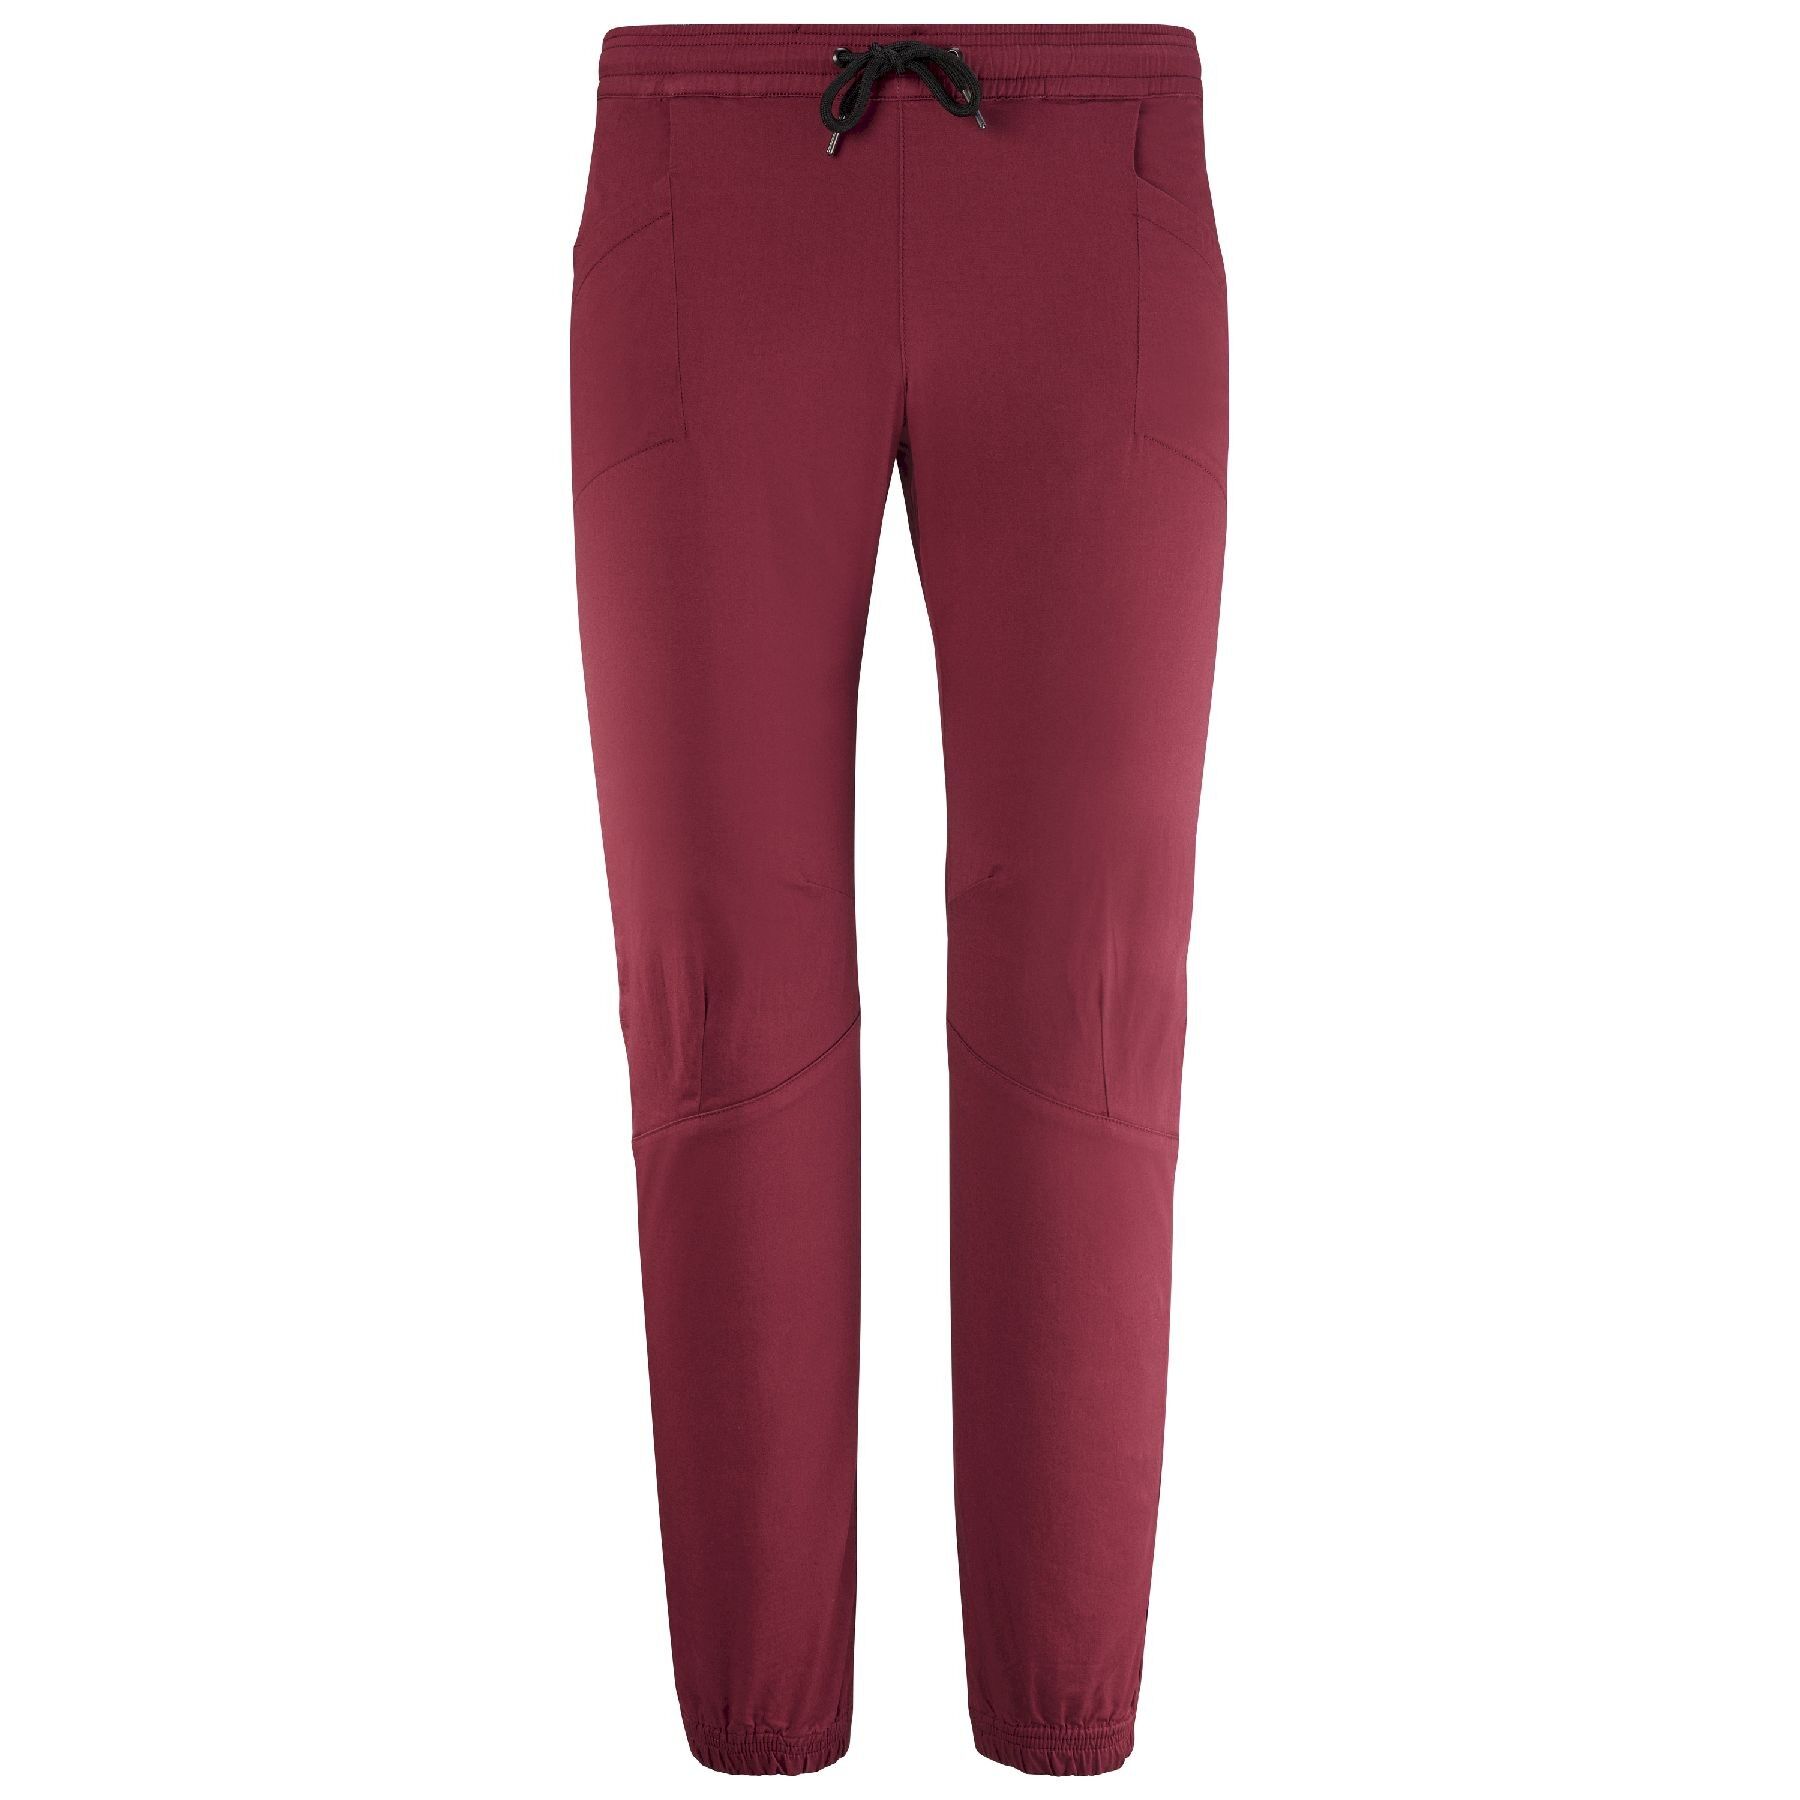 Millet Divino Stretch Pant - Climbing trousers - Women's